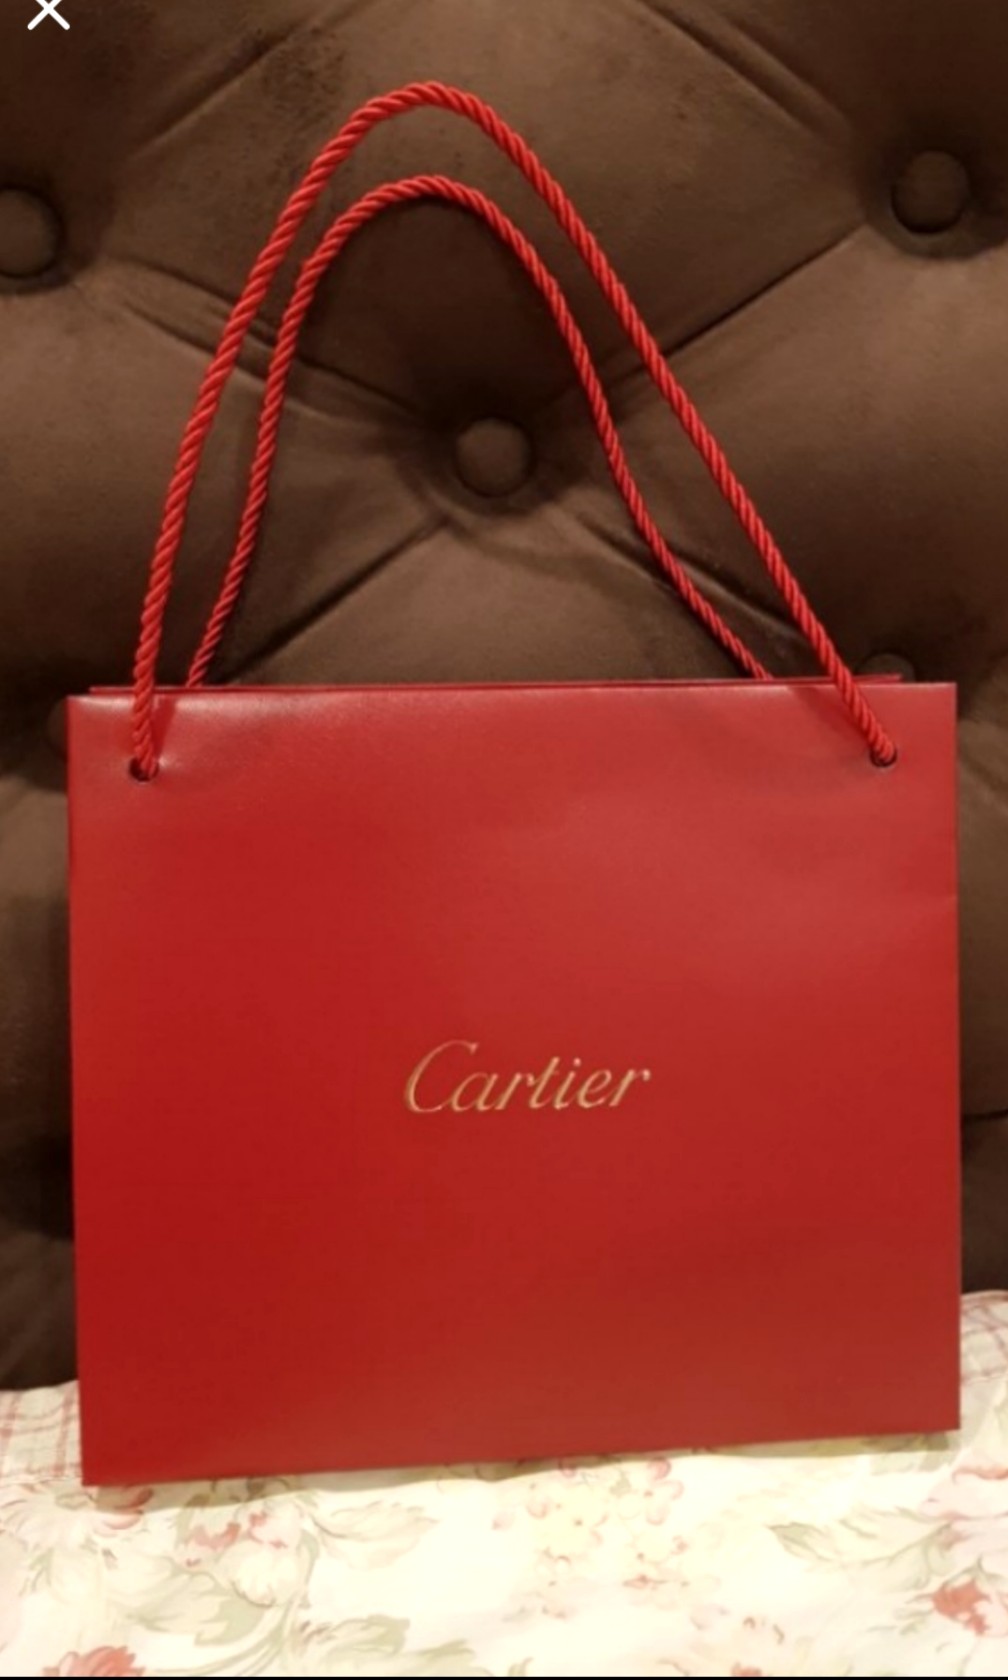 Authentic Cartier Gift Bag Shopping Paper Bags 10'' x 9'' & 8” x 7”